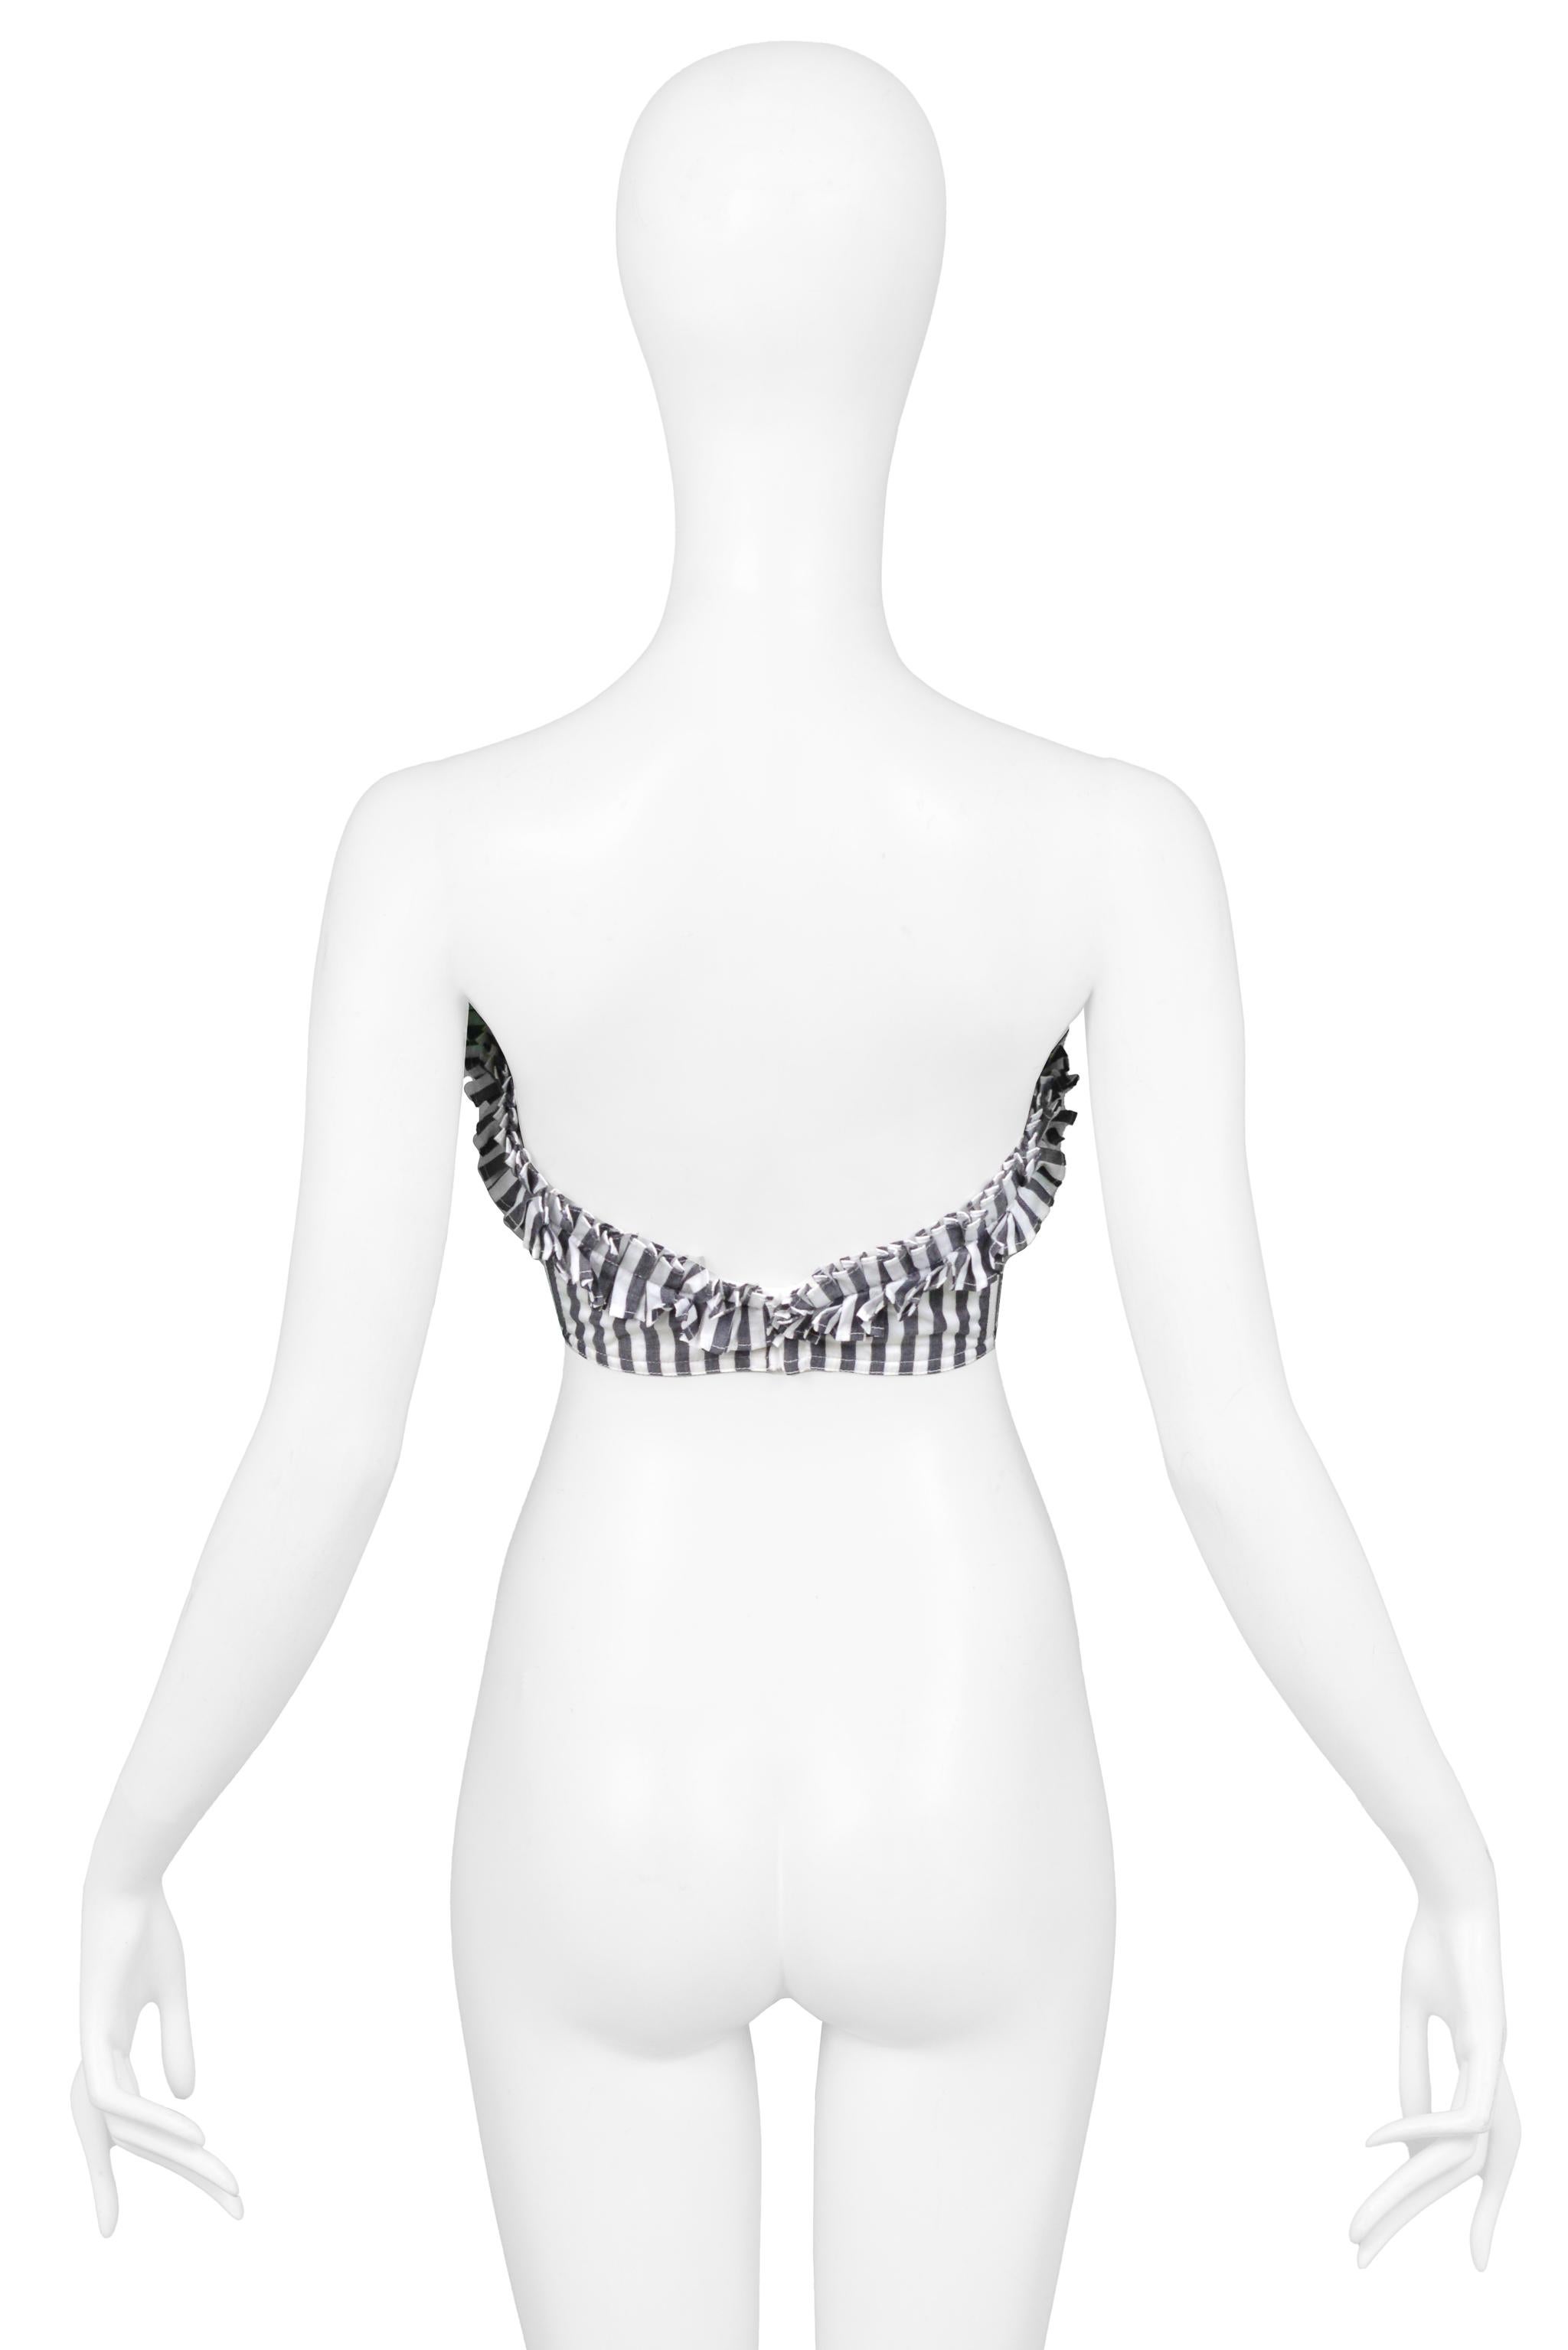 Gray Chantal Thomass Black & White Striped Bustier Top With Ruffles For Sale